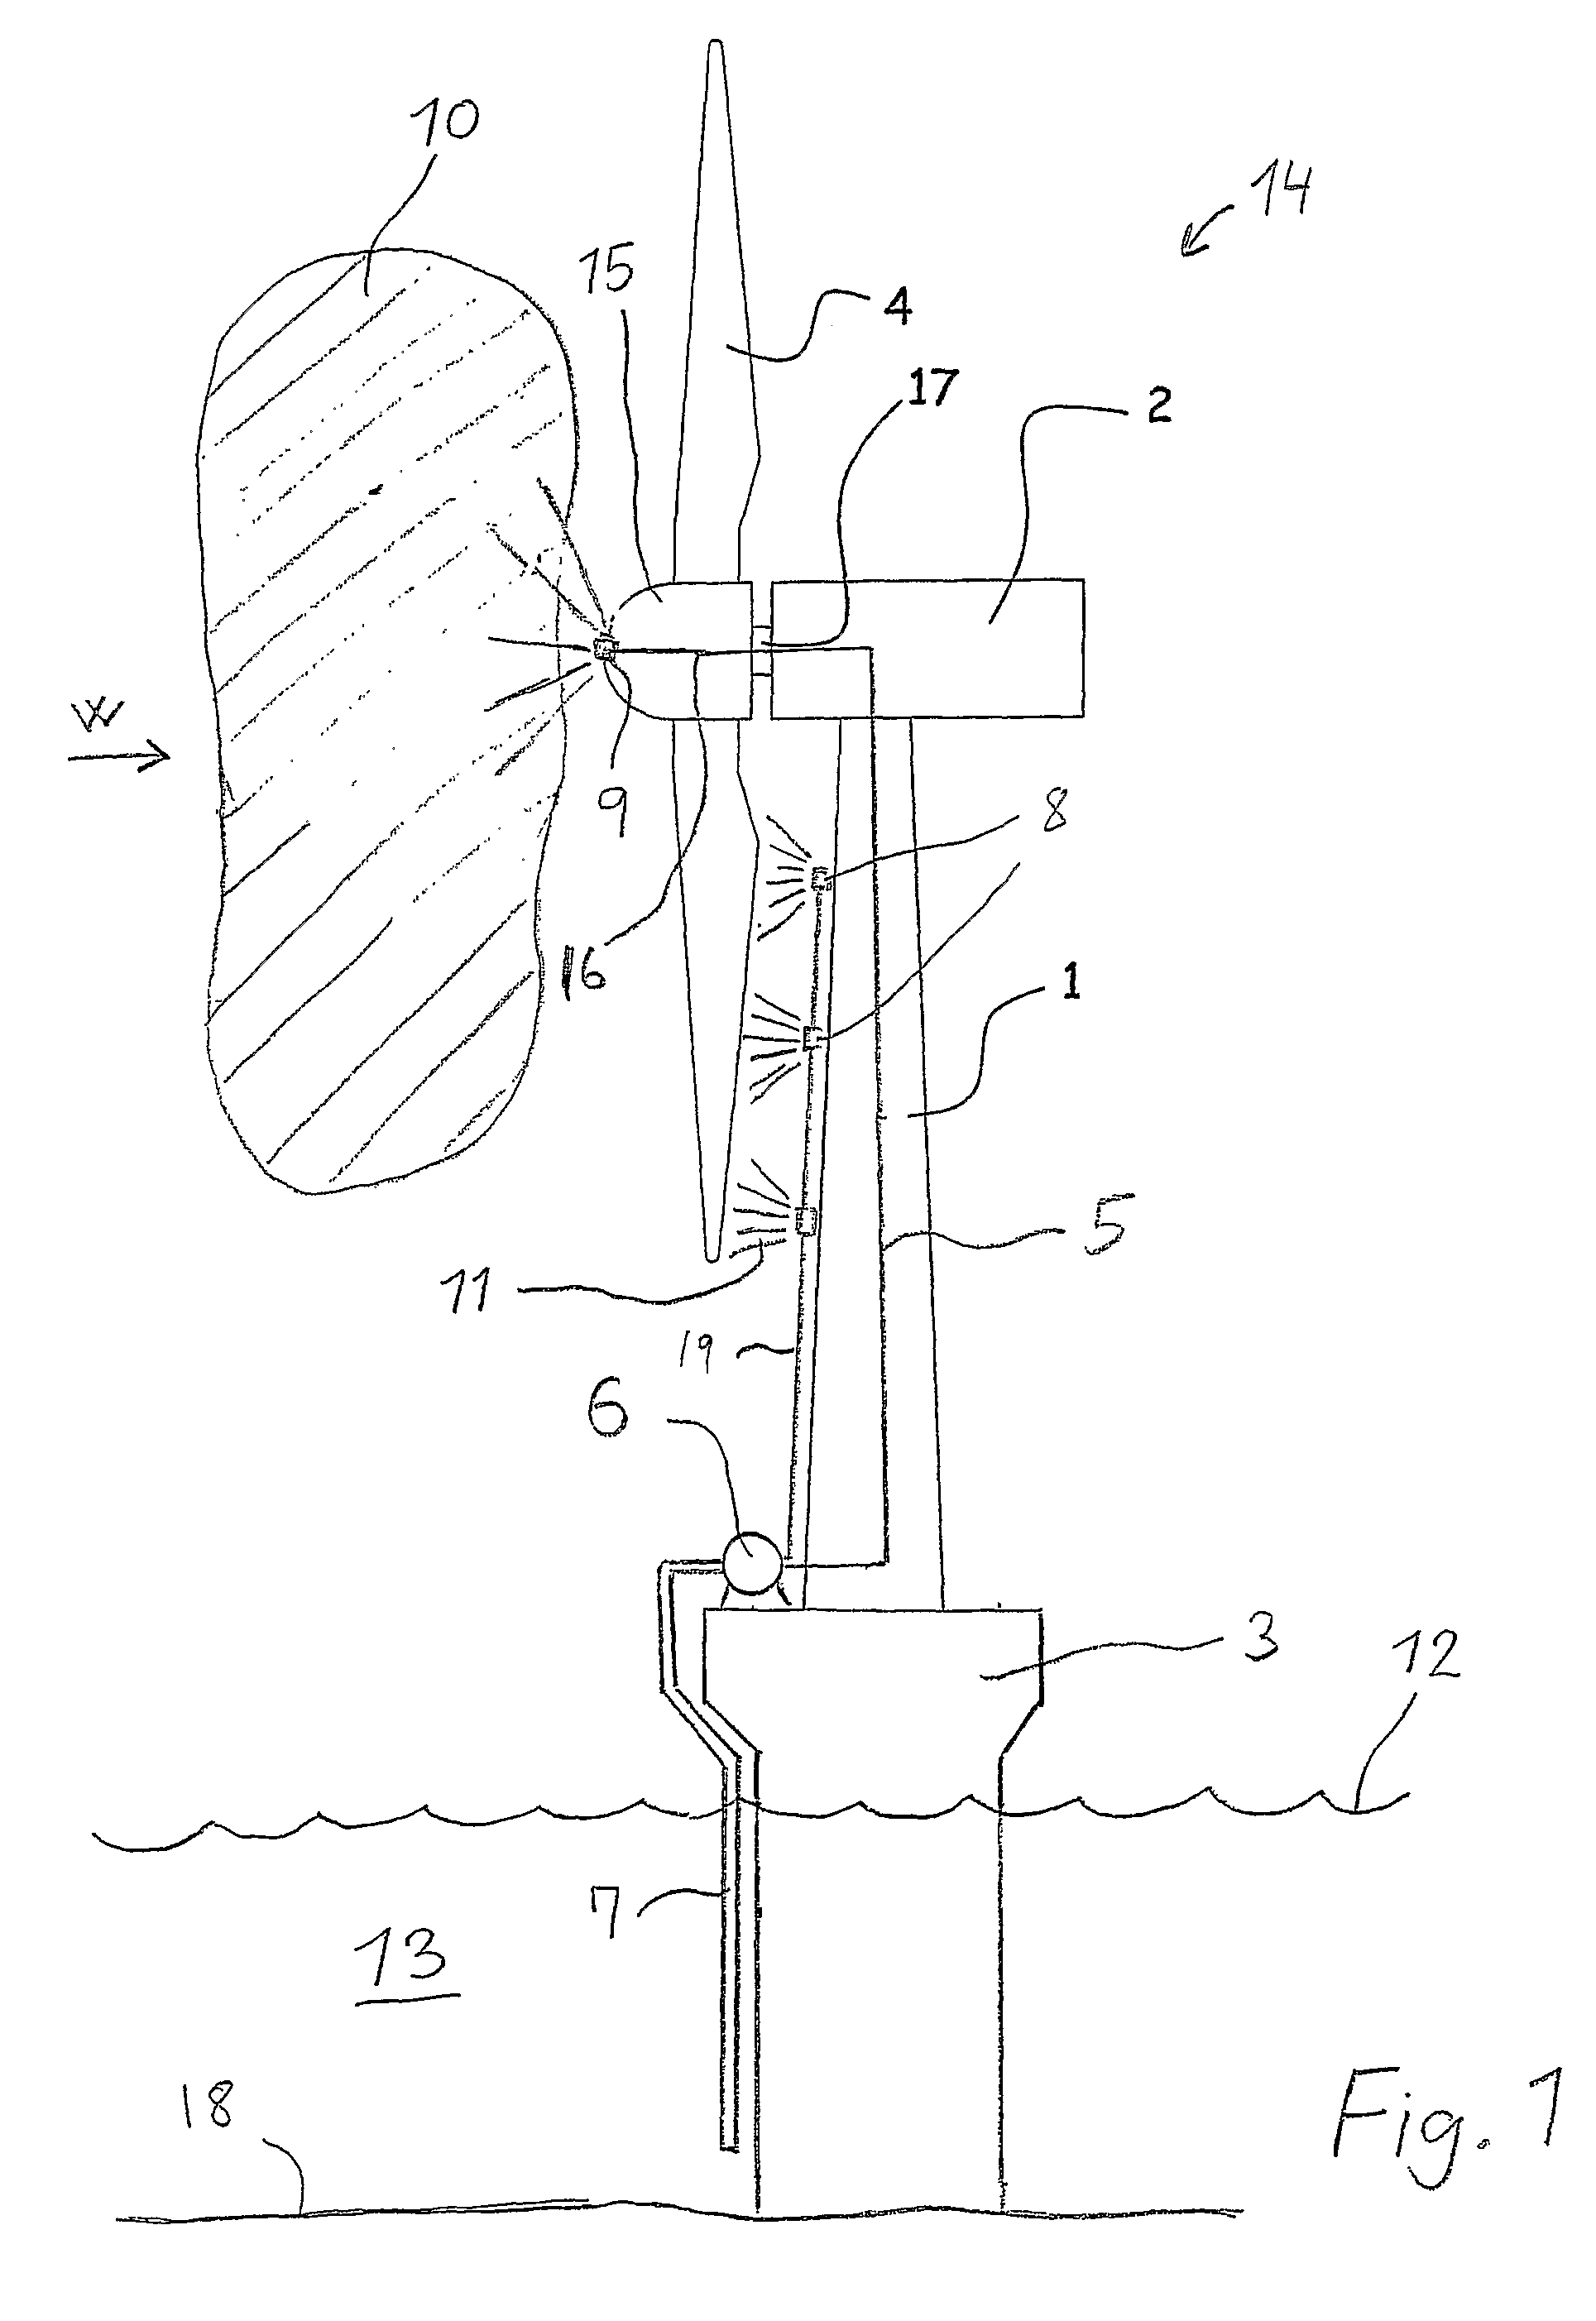 Offshore wind turbine with device for ice prevention